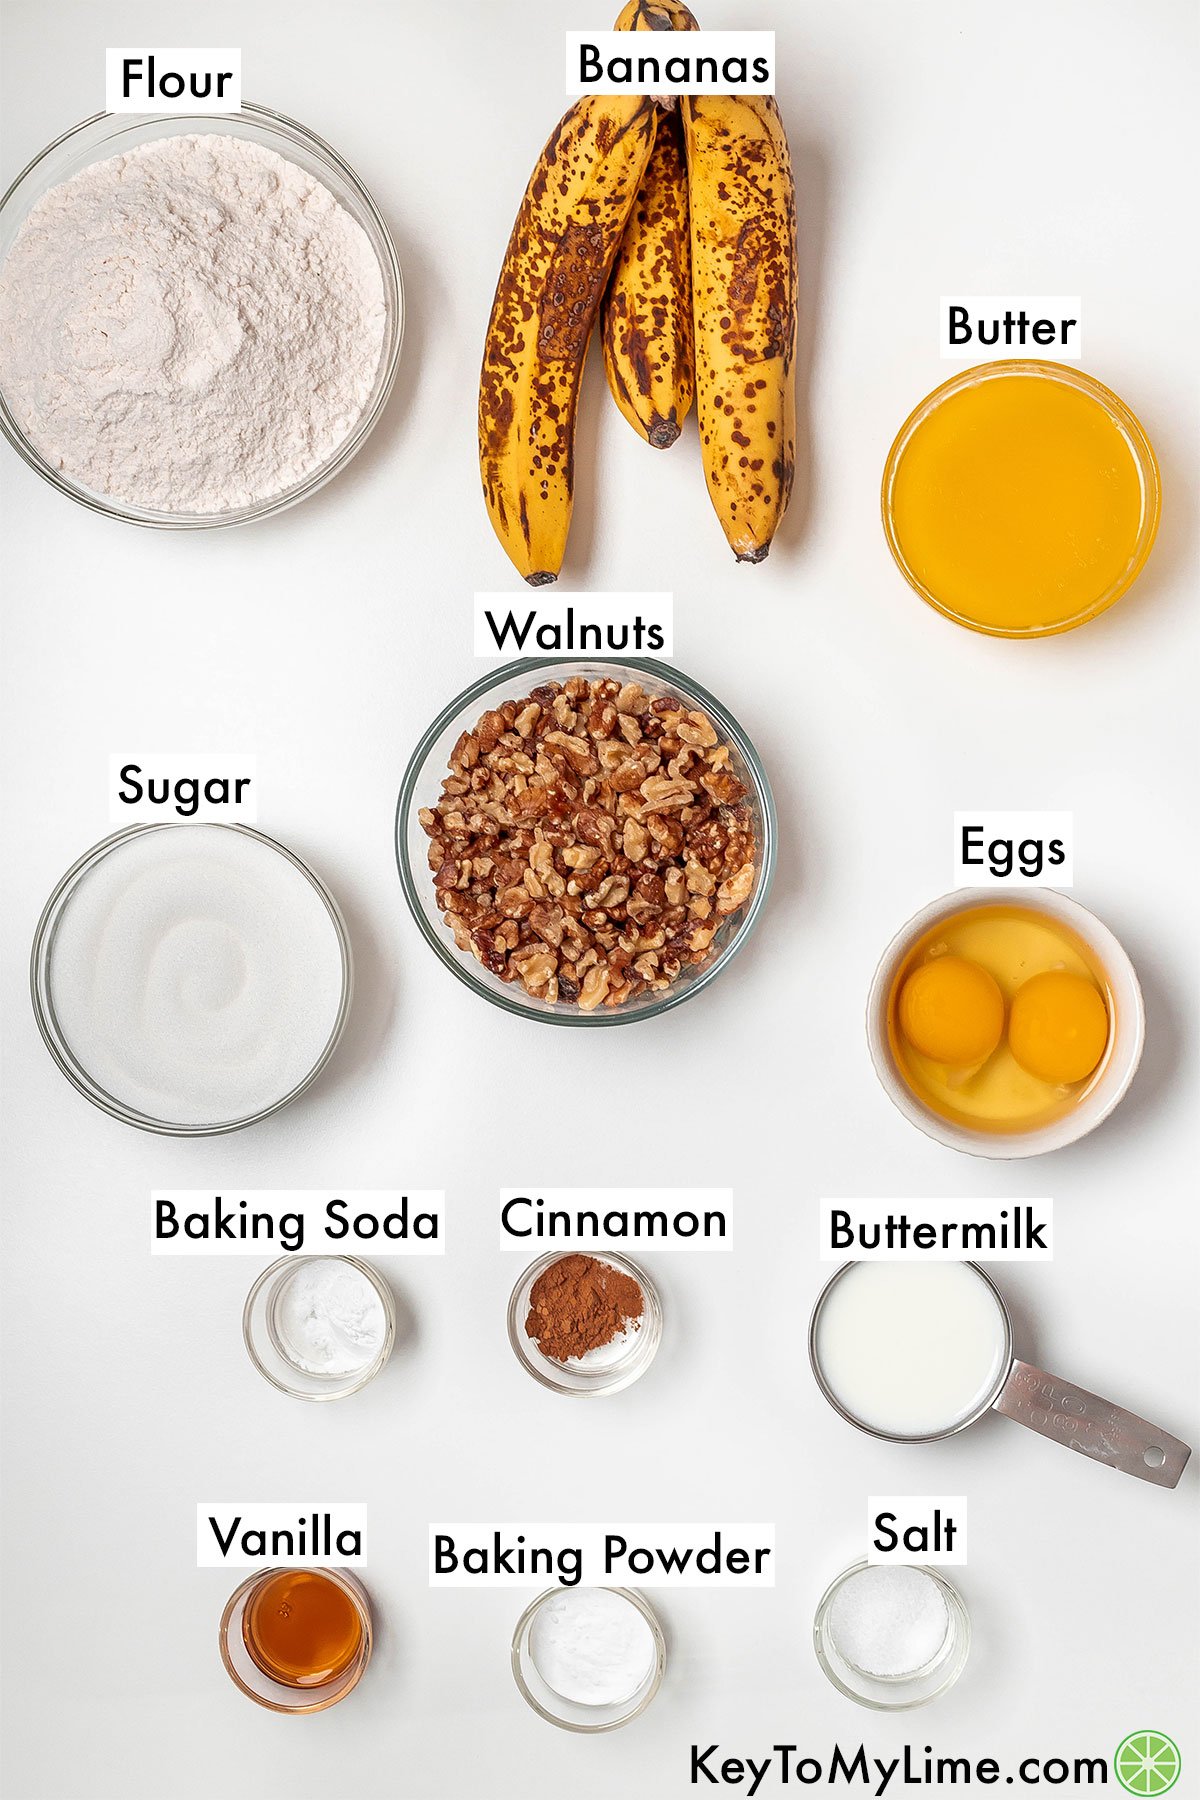 The labeled ingredients for banana nut muffins.